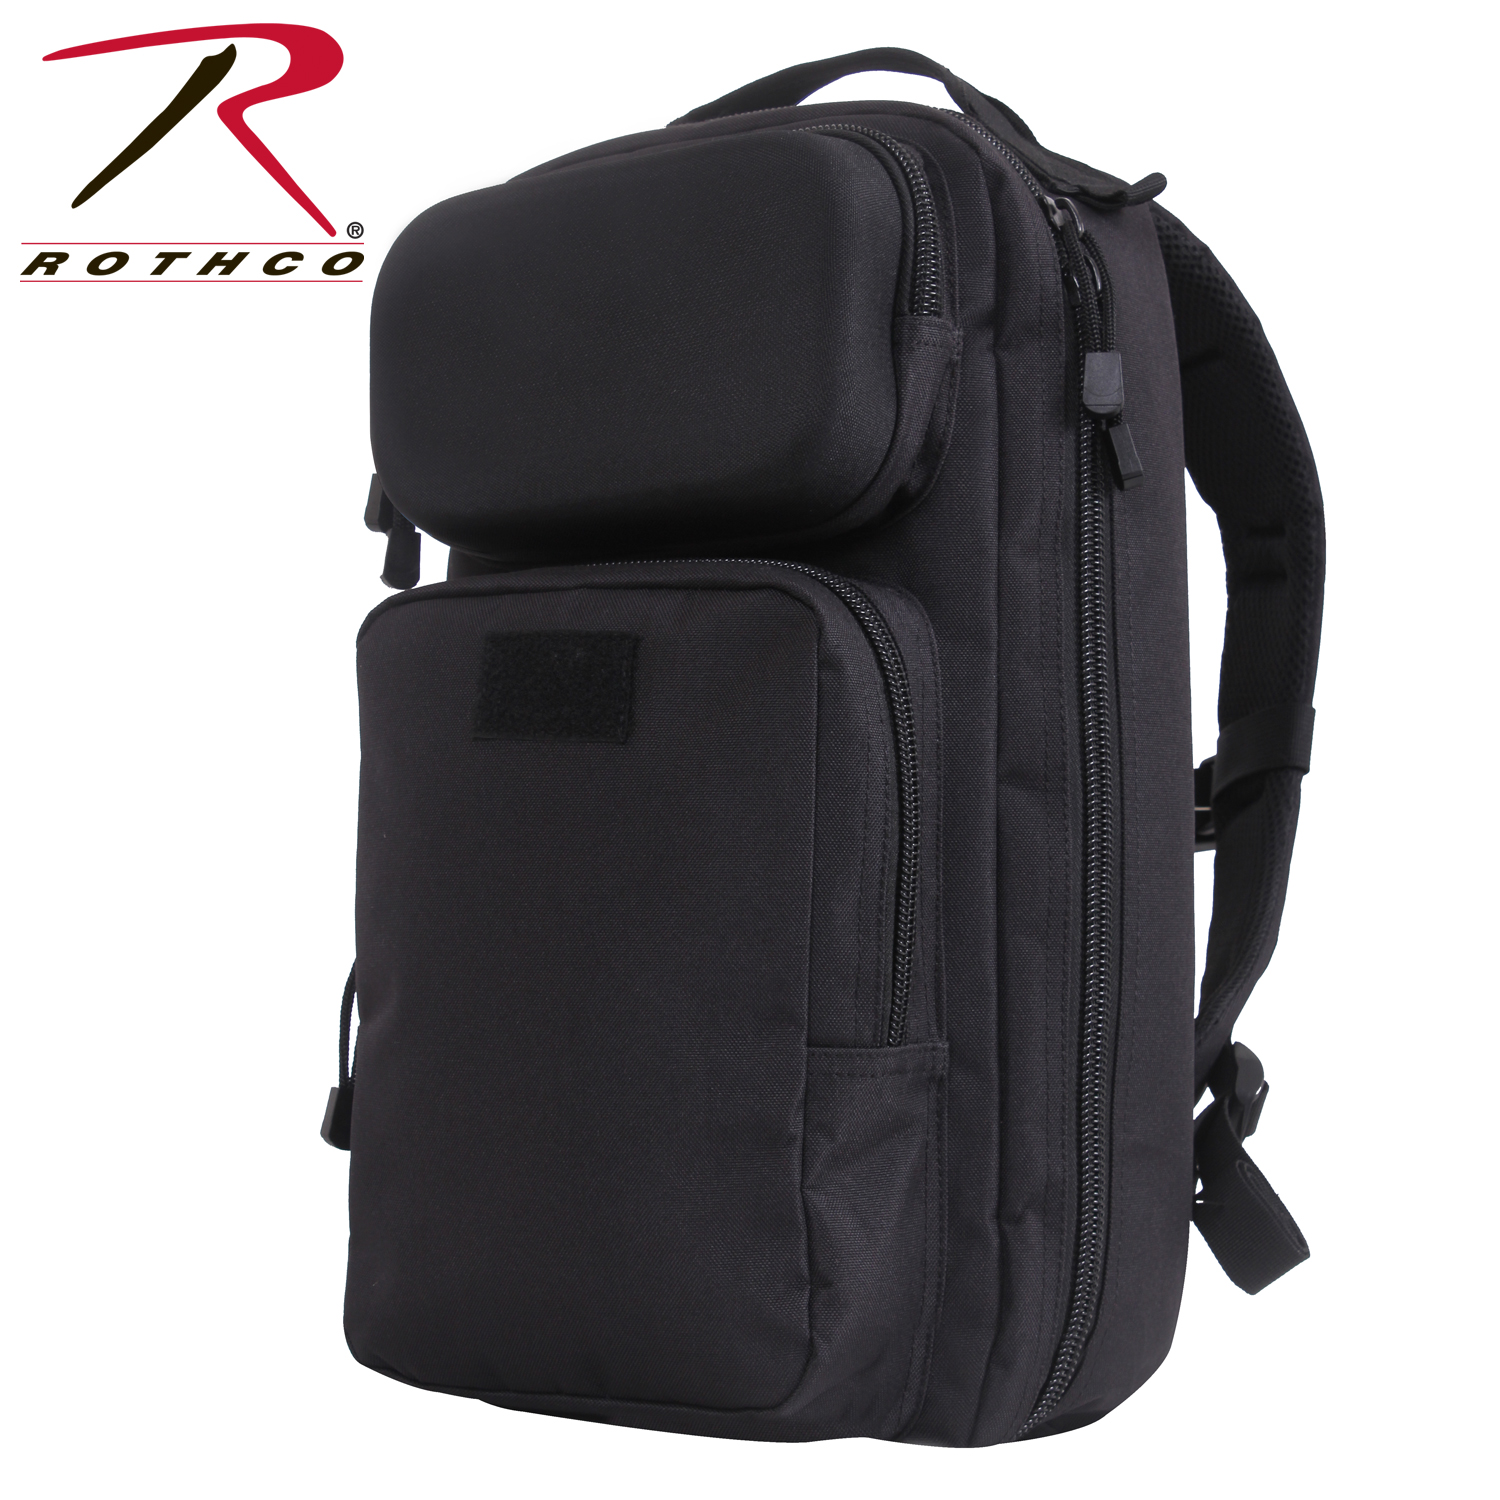 Rothco Every Day Carry Transport Pack